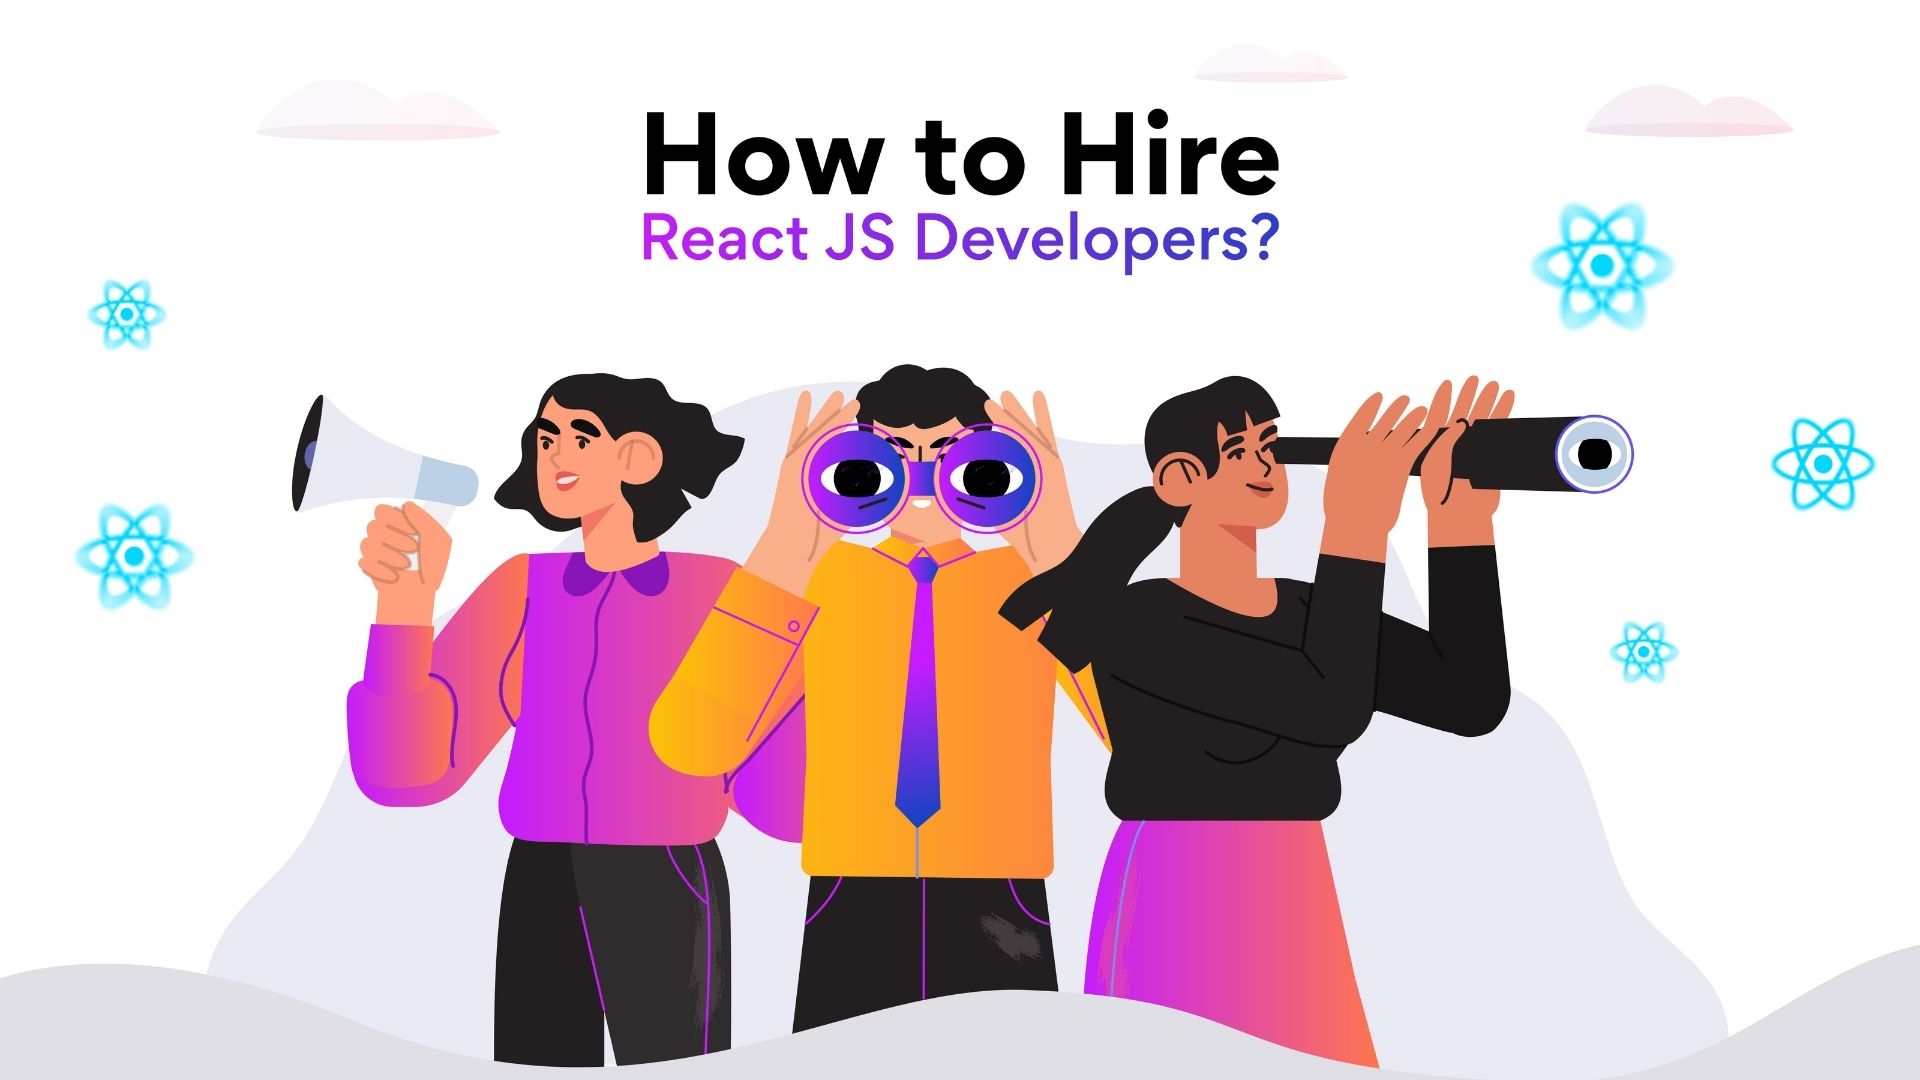 How to hire React JS developers